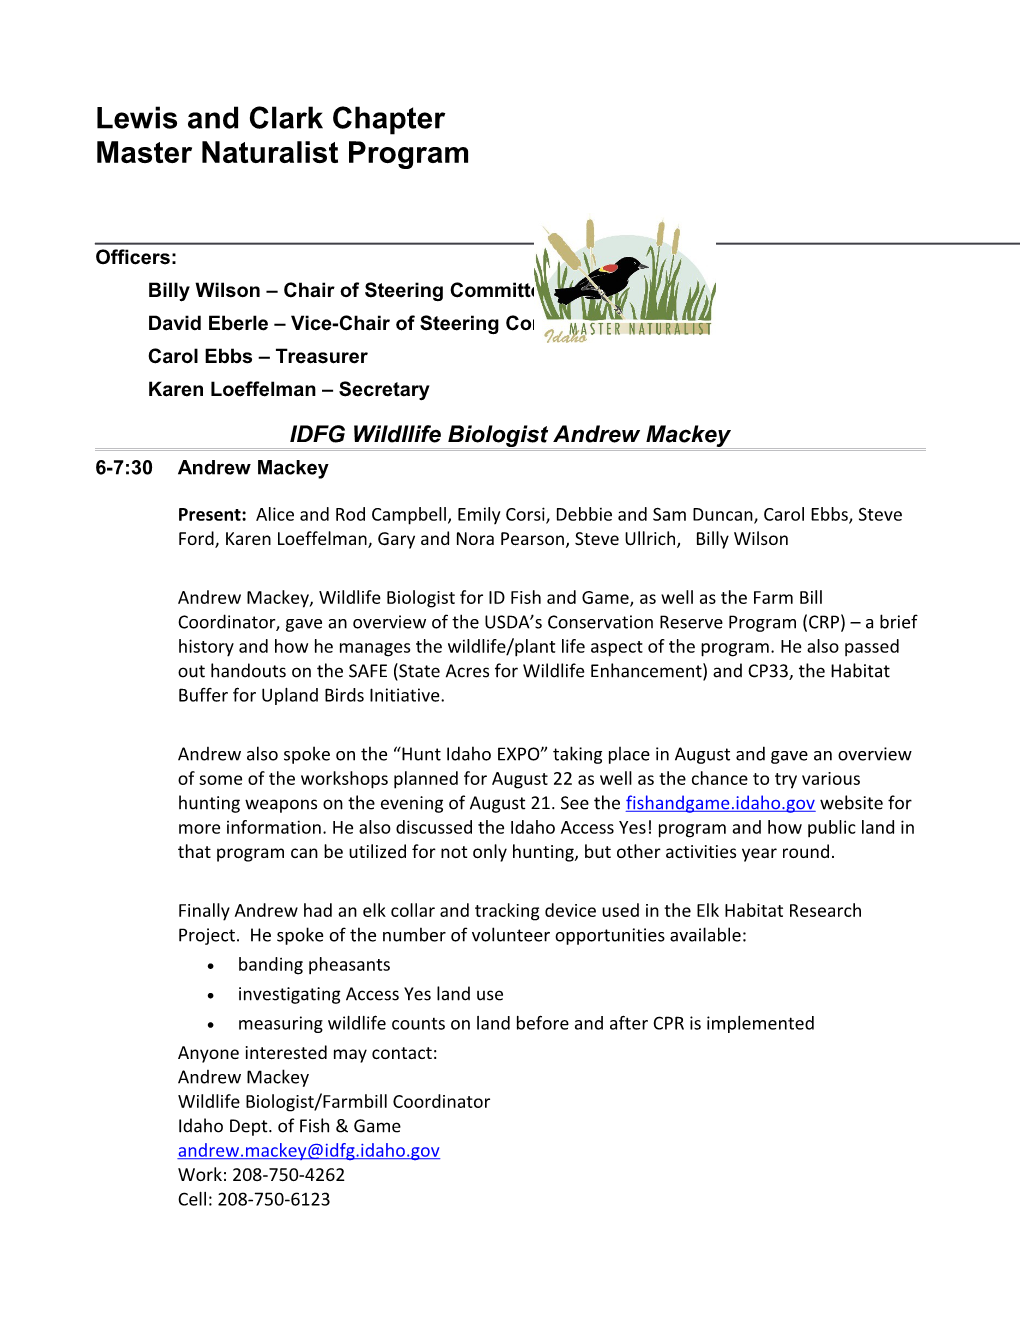 Idaho Master Naturalist Lewis and Clark Chapter Meeting Minutes, 06-23-2015